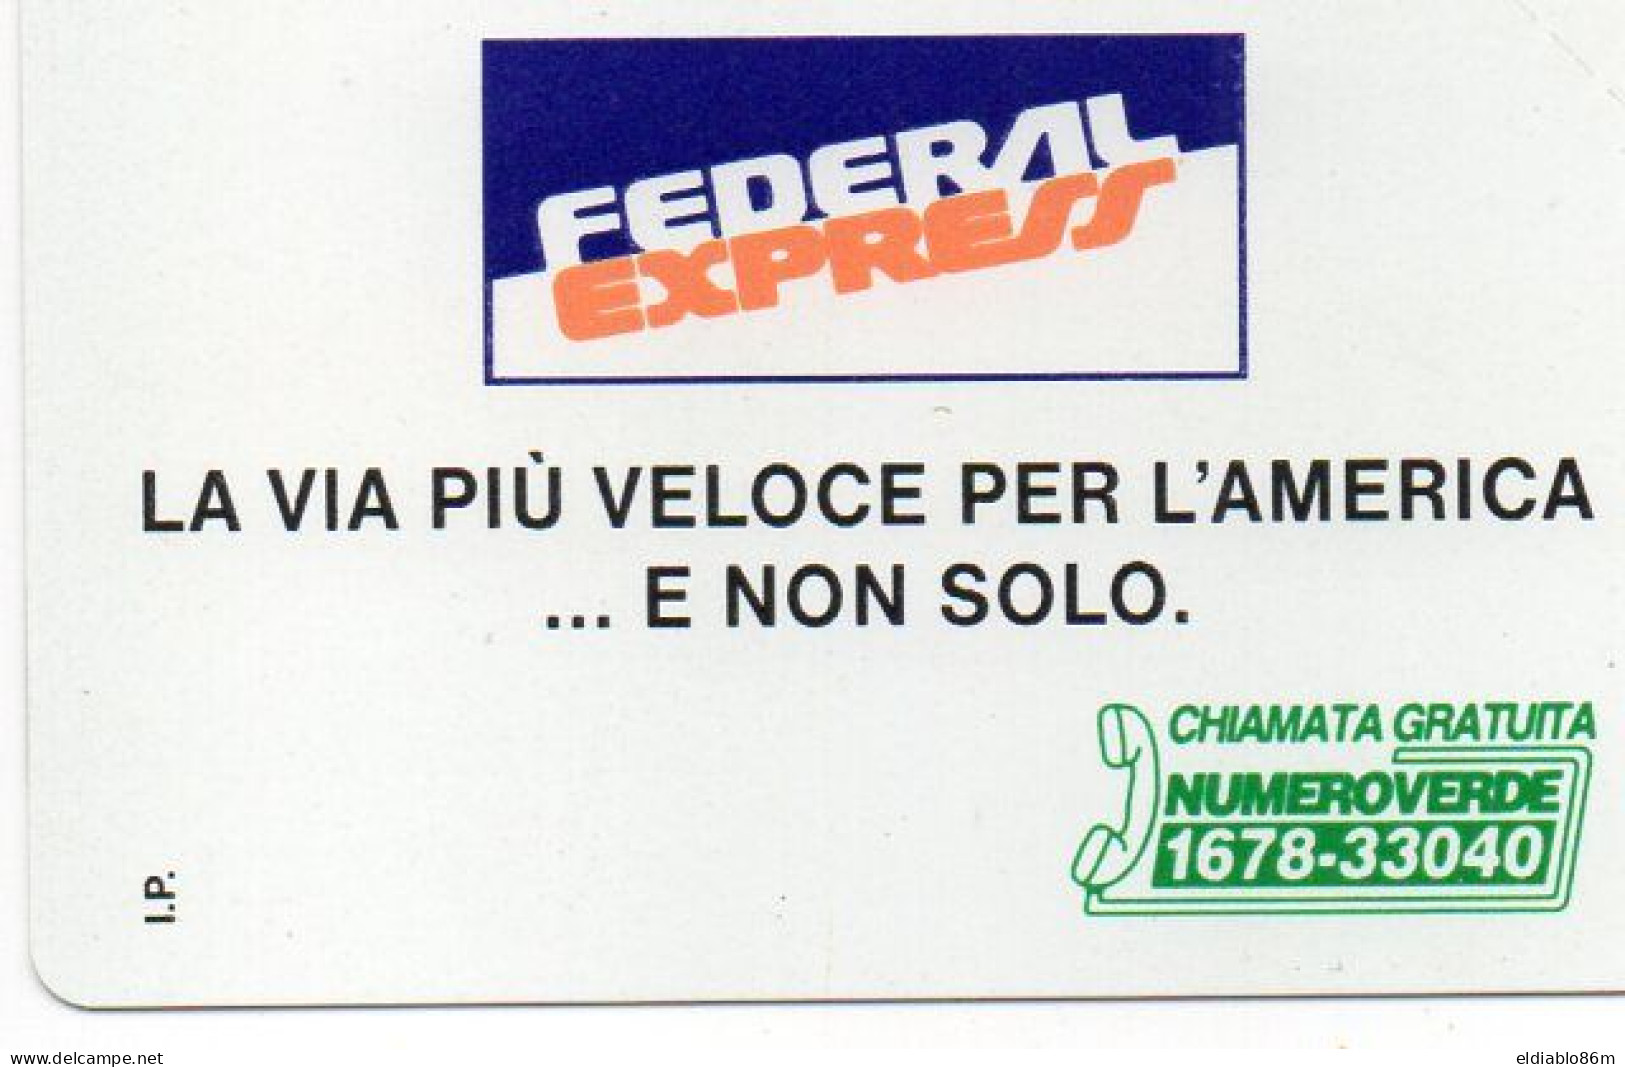 ITALY - MAGNETIC CARD - SIP - PRIVATE RESE PUBBLICHE - 190 - FEDERAL EXPRESS - MINT - Private TK - Reprints